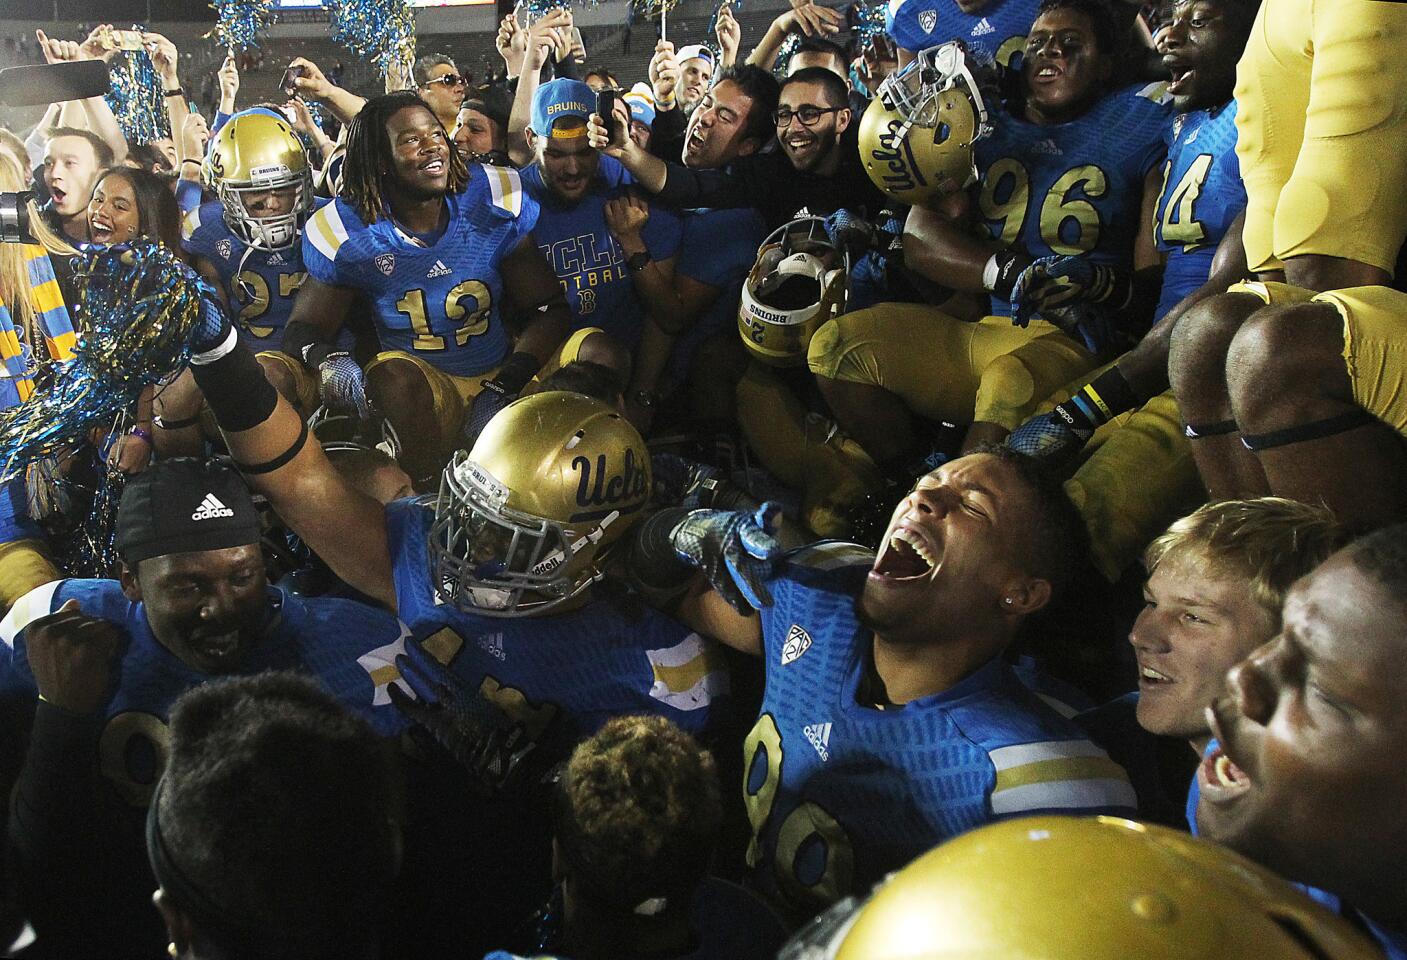 UCLA players celebrate a 38-20 win over USC on Saturday night at the Rose Bowl.